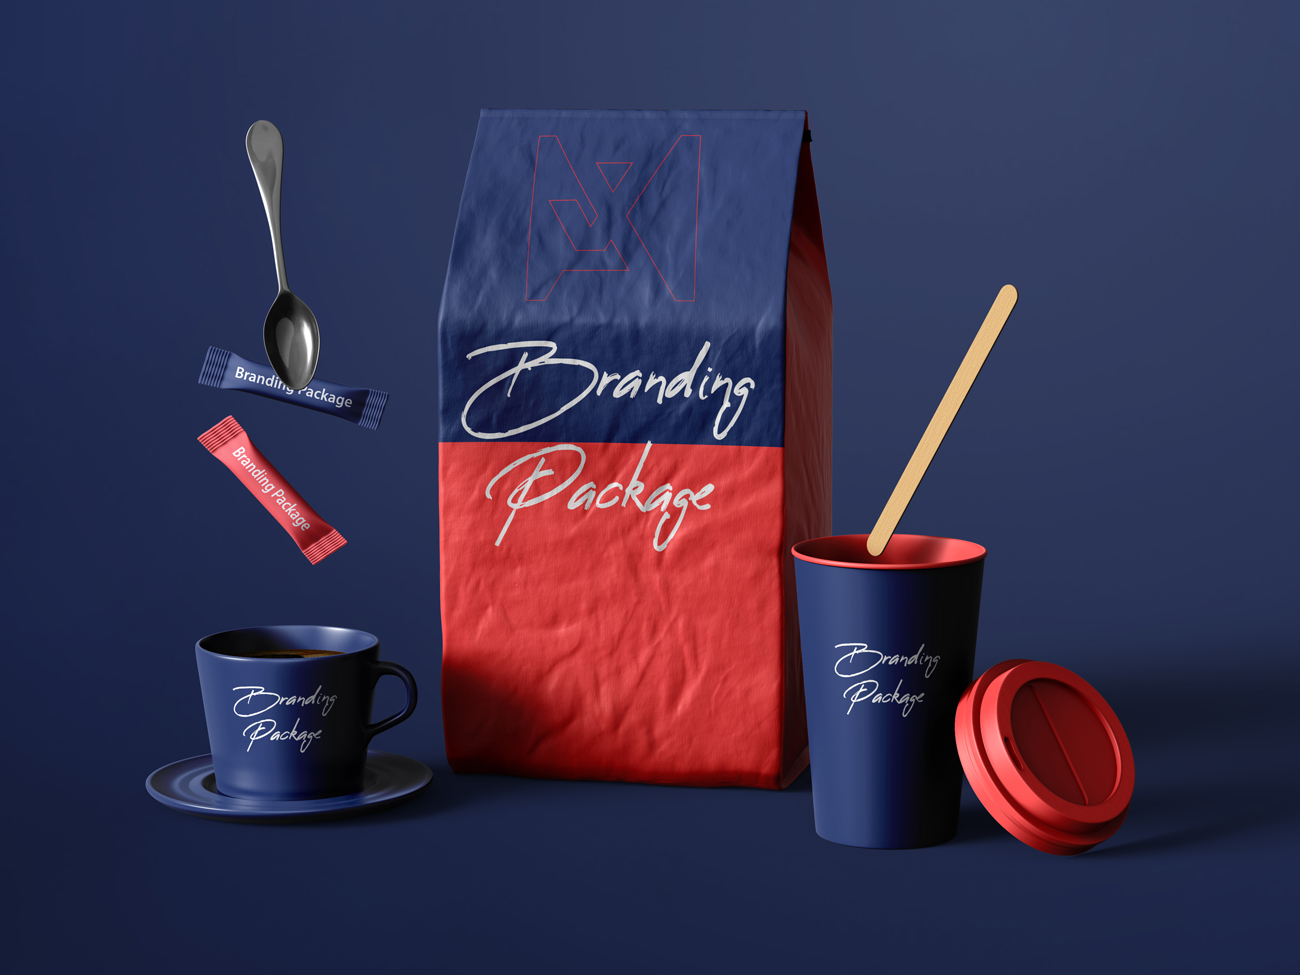 product packaging design in nagpur